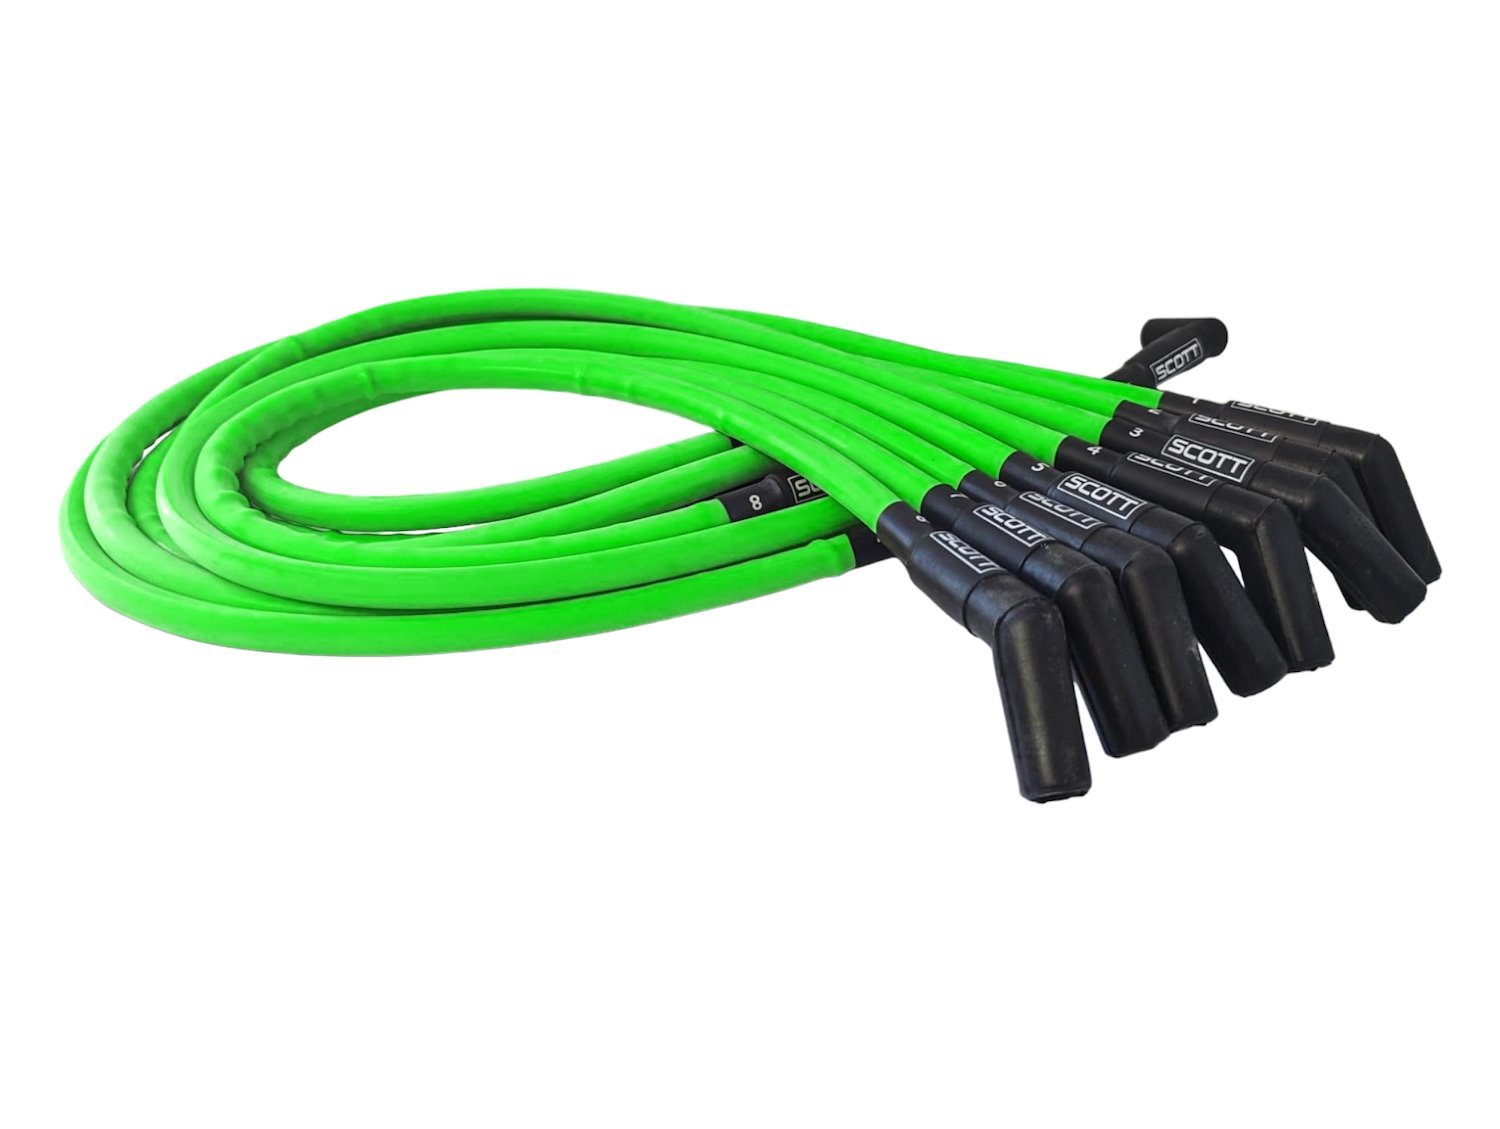 SPW300-CH-426-8 Super Mag Fiberglass-Oversleeved Spark Plug Wire Set for Small Block Ford, Over Valve Cover [Green]